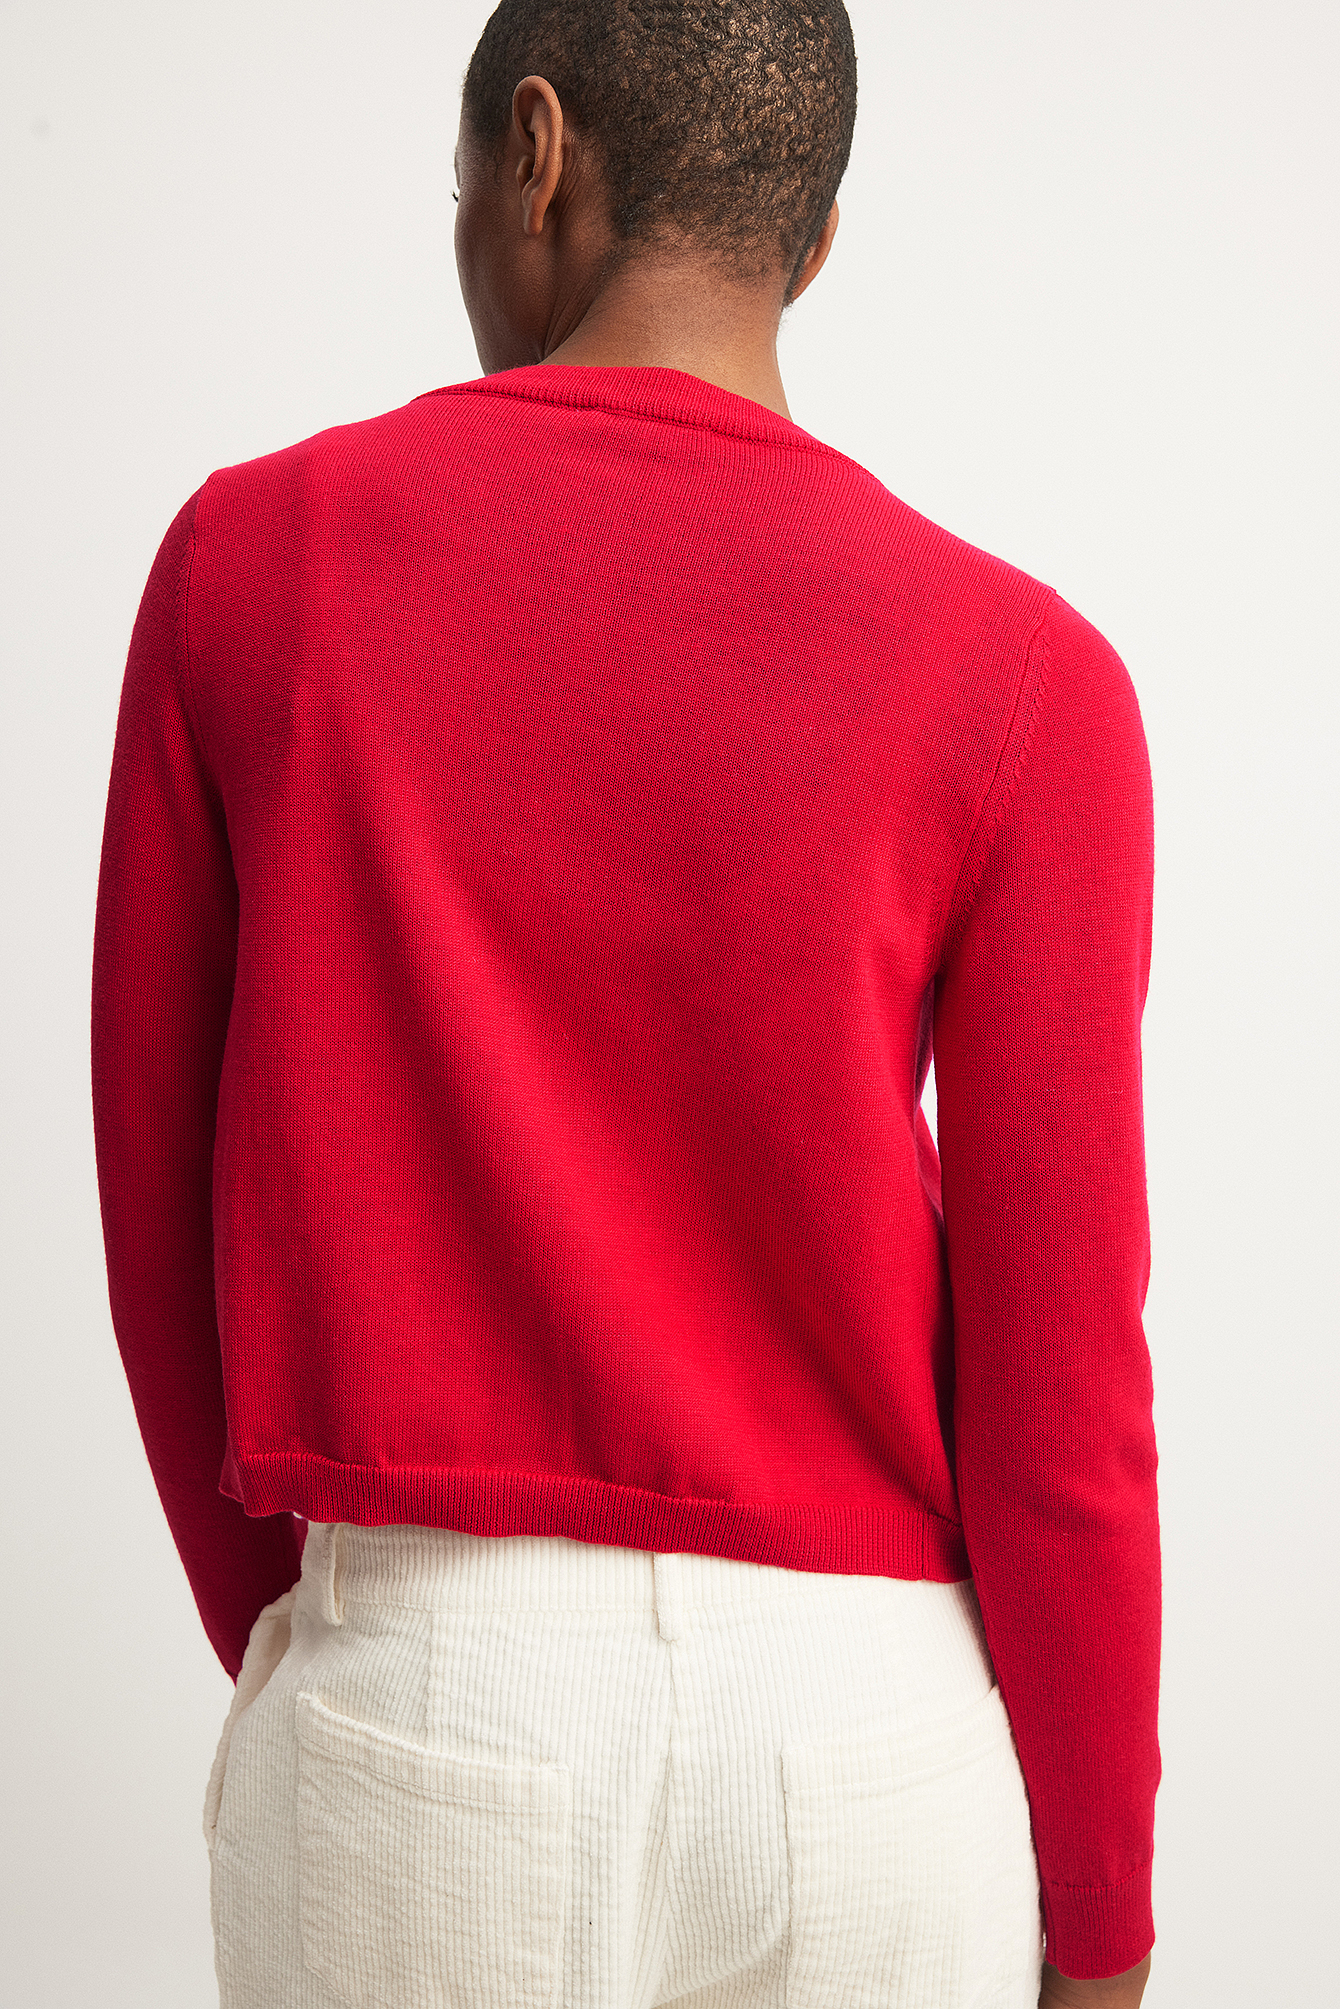 Knitted Red Sweater 